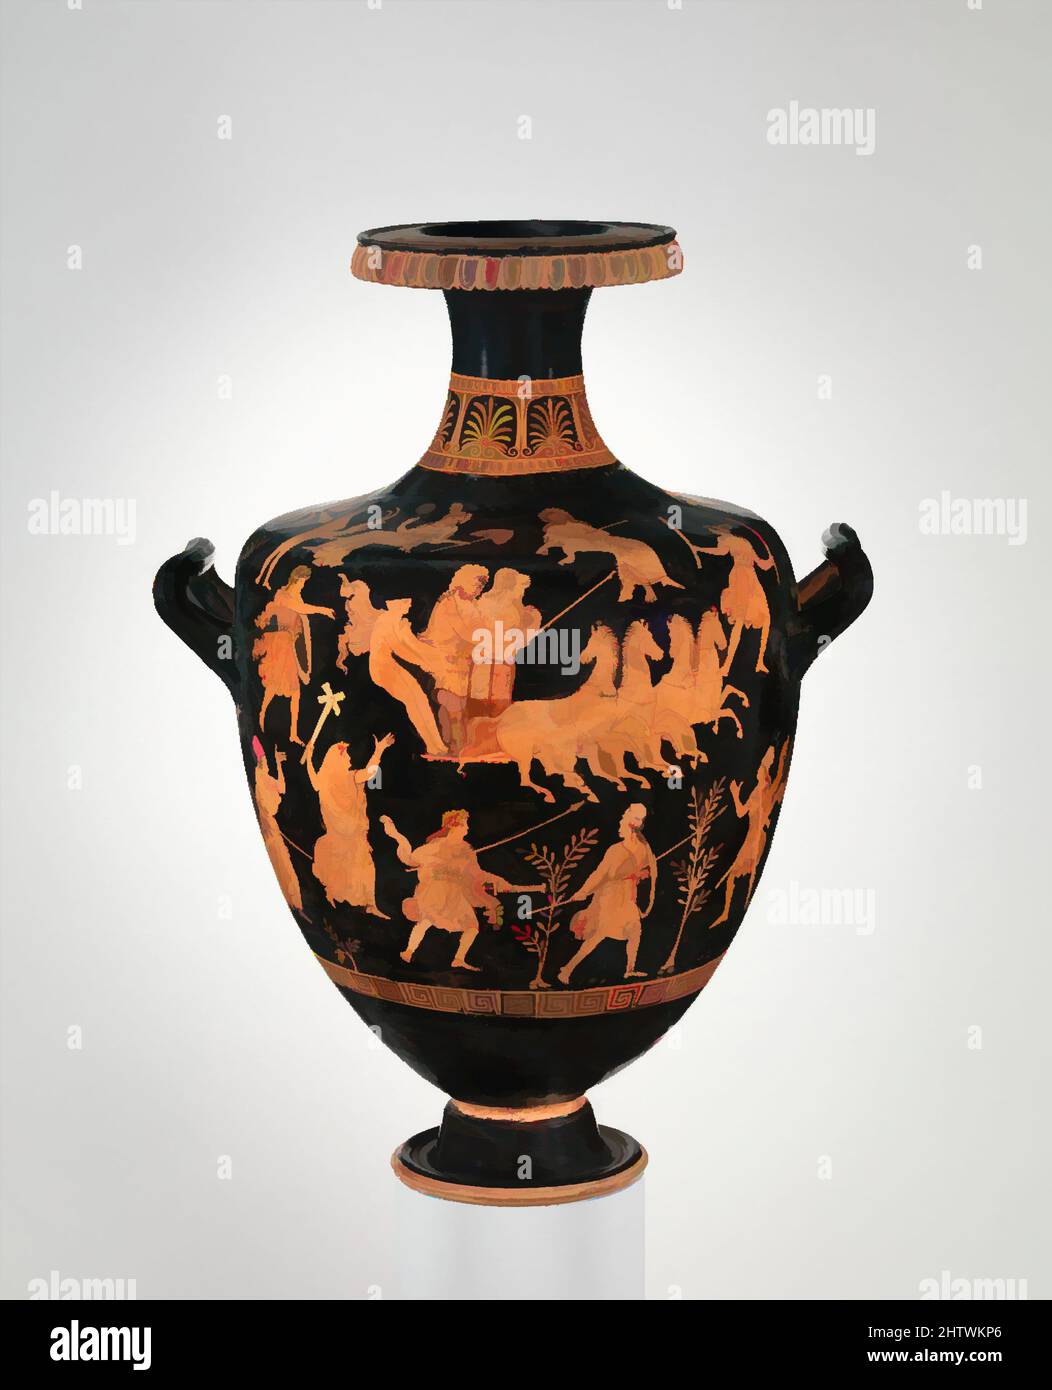 Art inspired by Terracotta hydria (water jar), Late Classical, ca. 340–330 B.C., Greek, South Italian, Apulian, Terracotta; red-figure, H. 29 3/4 in. (75.6 cm), Vases, The abduction of Persephone by Hades surrounded by gods. The myth of the abduction of Persephone was situated in, Classic works modernized by Artotop with a splash of modernity. Shapes, color and value, eye-catching visual impact on art. Emotions through freedom of artworks in a contemporary way. A timeless message pursuing a wildly creative new direction. Artists turning to the digital medium and creating the Artotop NFT Stock Photo